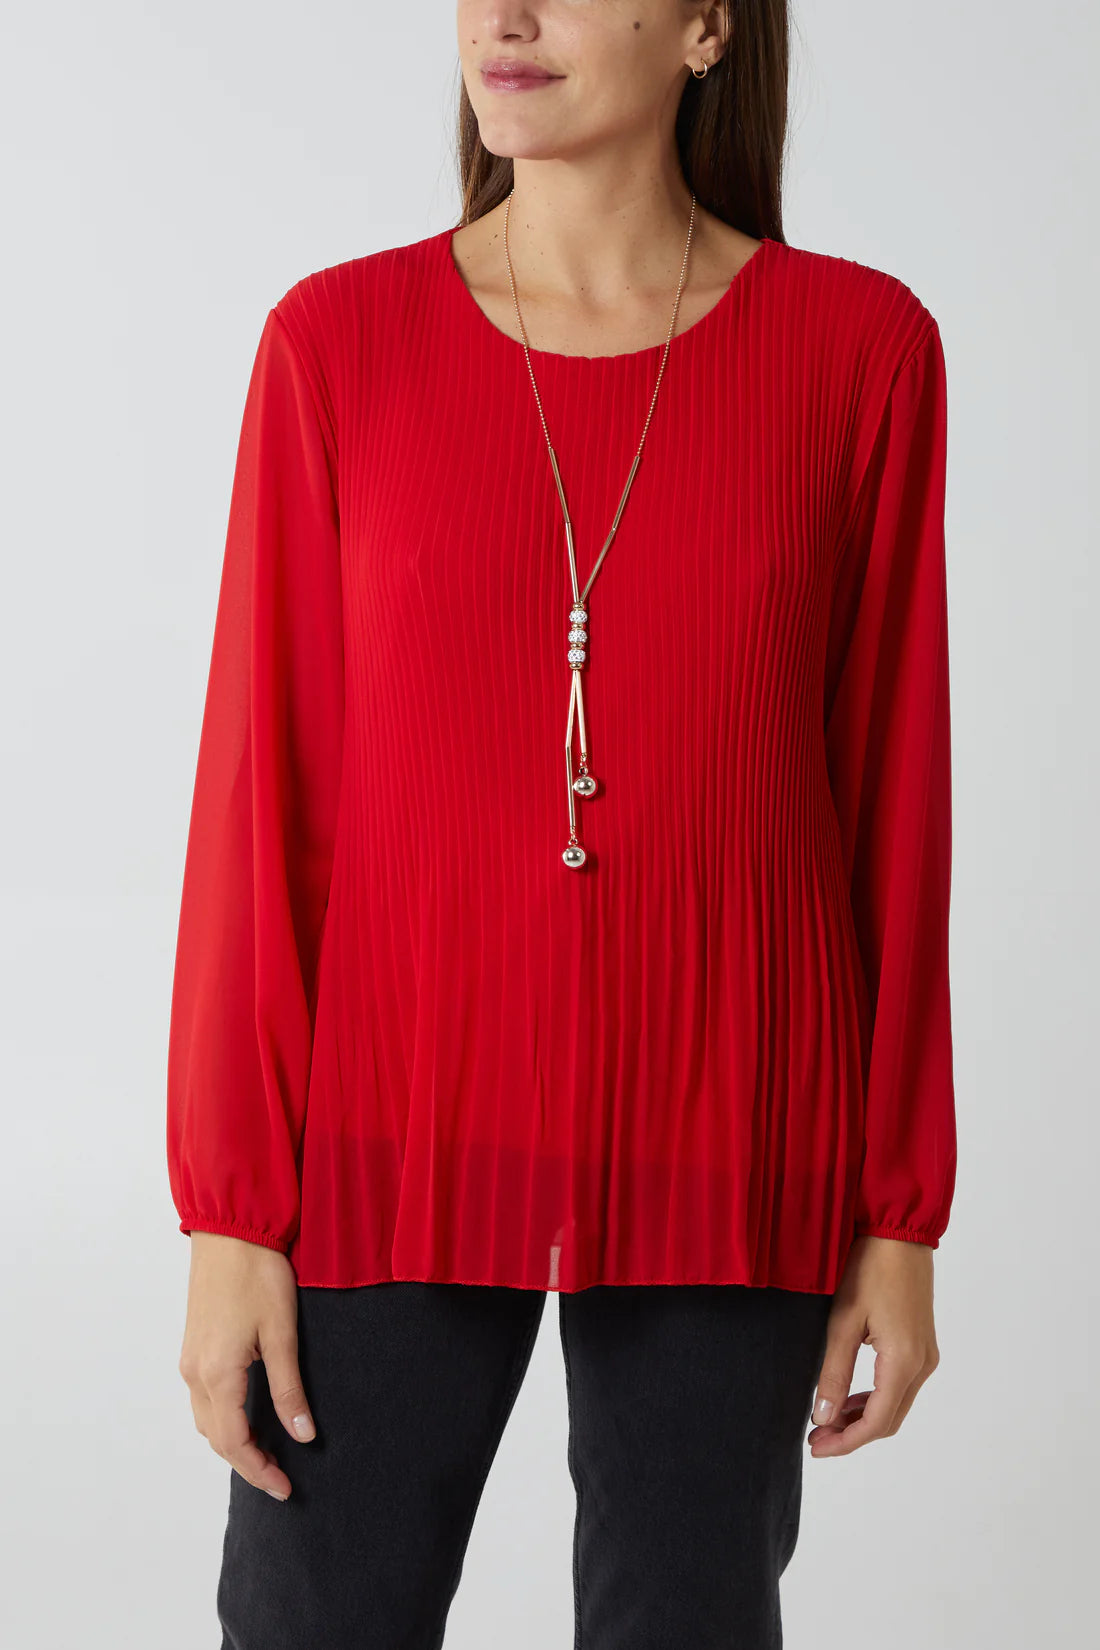 Pleat Top with Long Sleeve